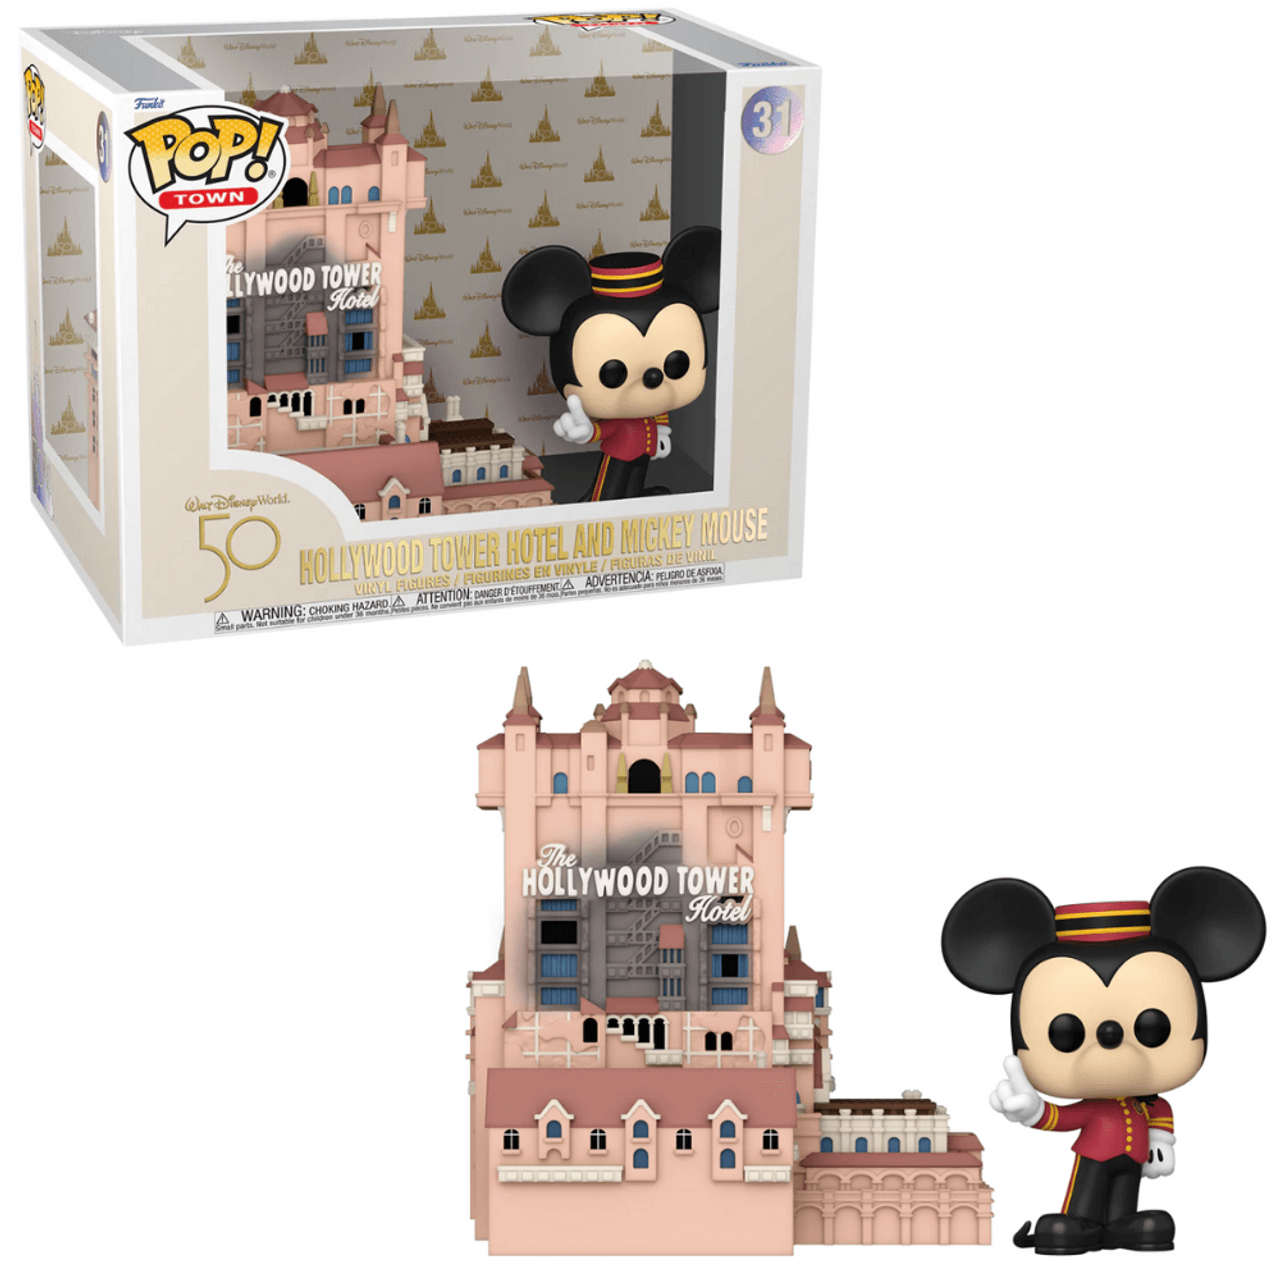 Pop! Town - Disney - Hollywood Tower Hotel And Mickey Mouse - #31 - Hobby Champion Inc